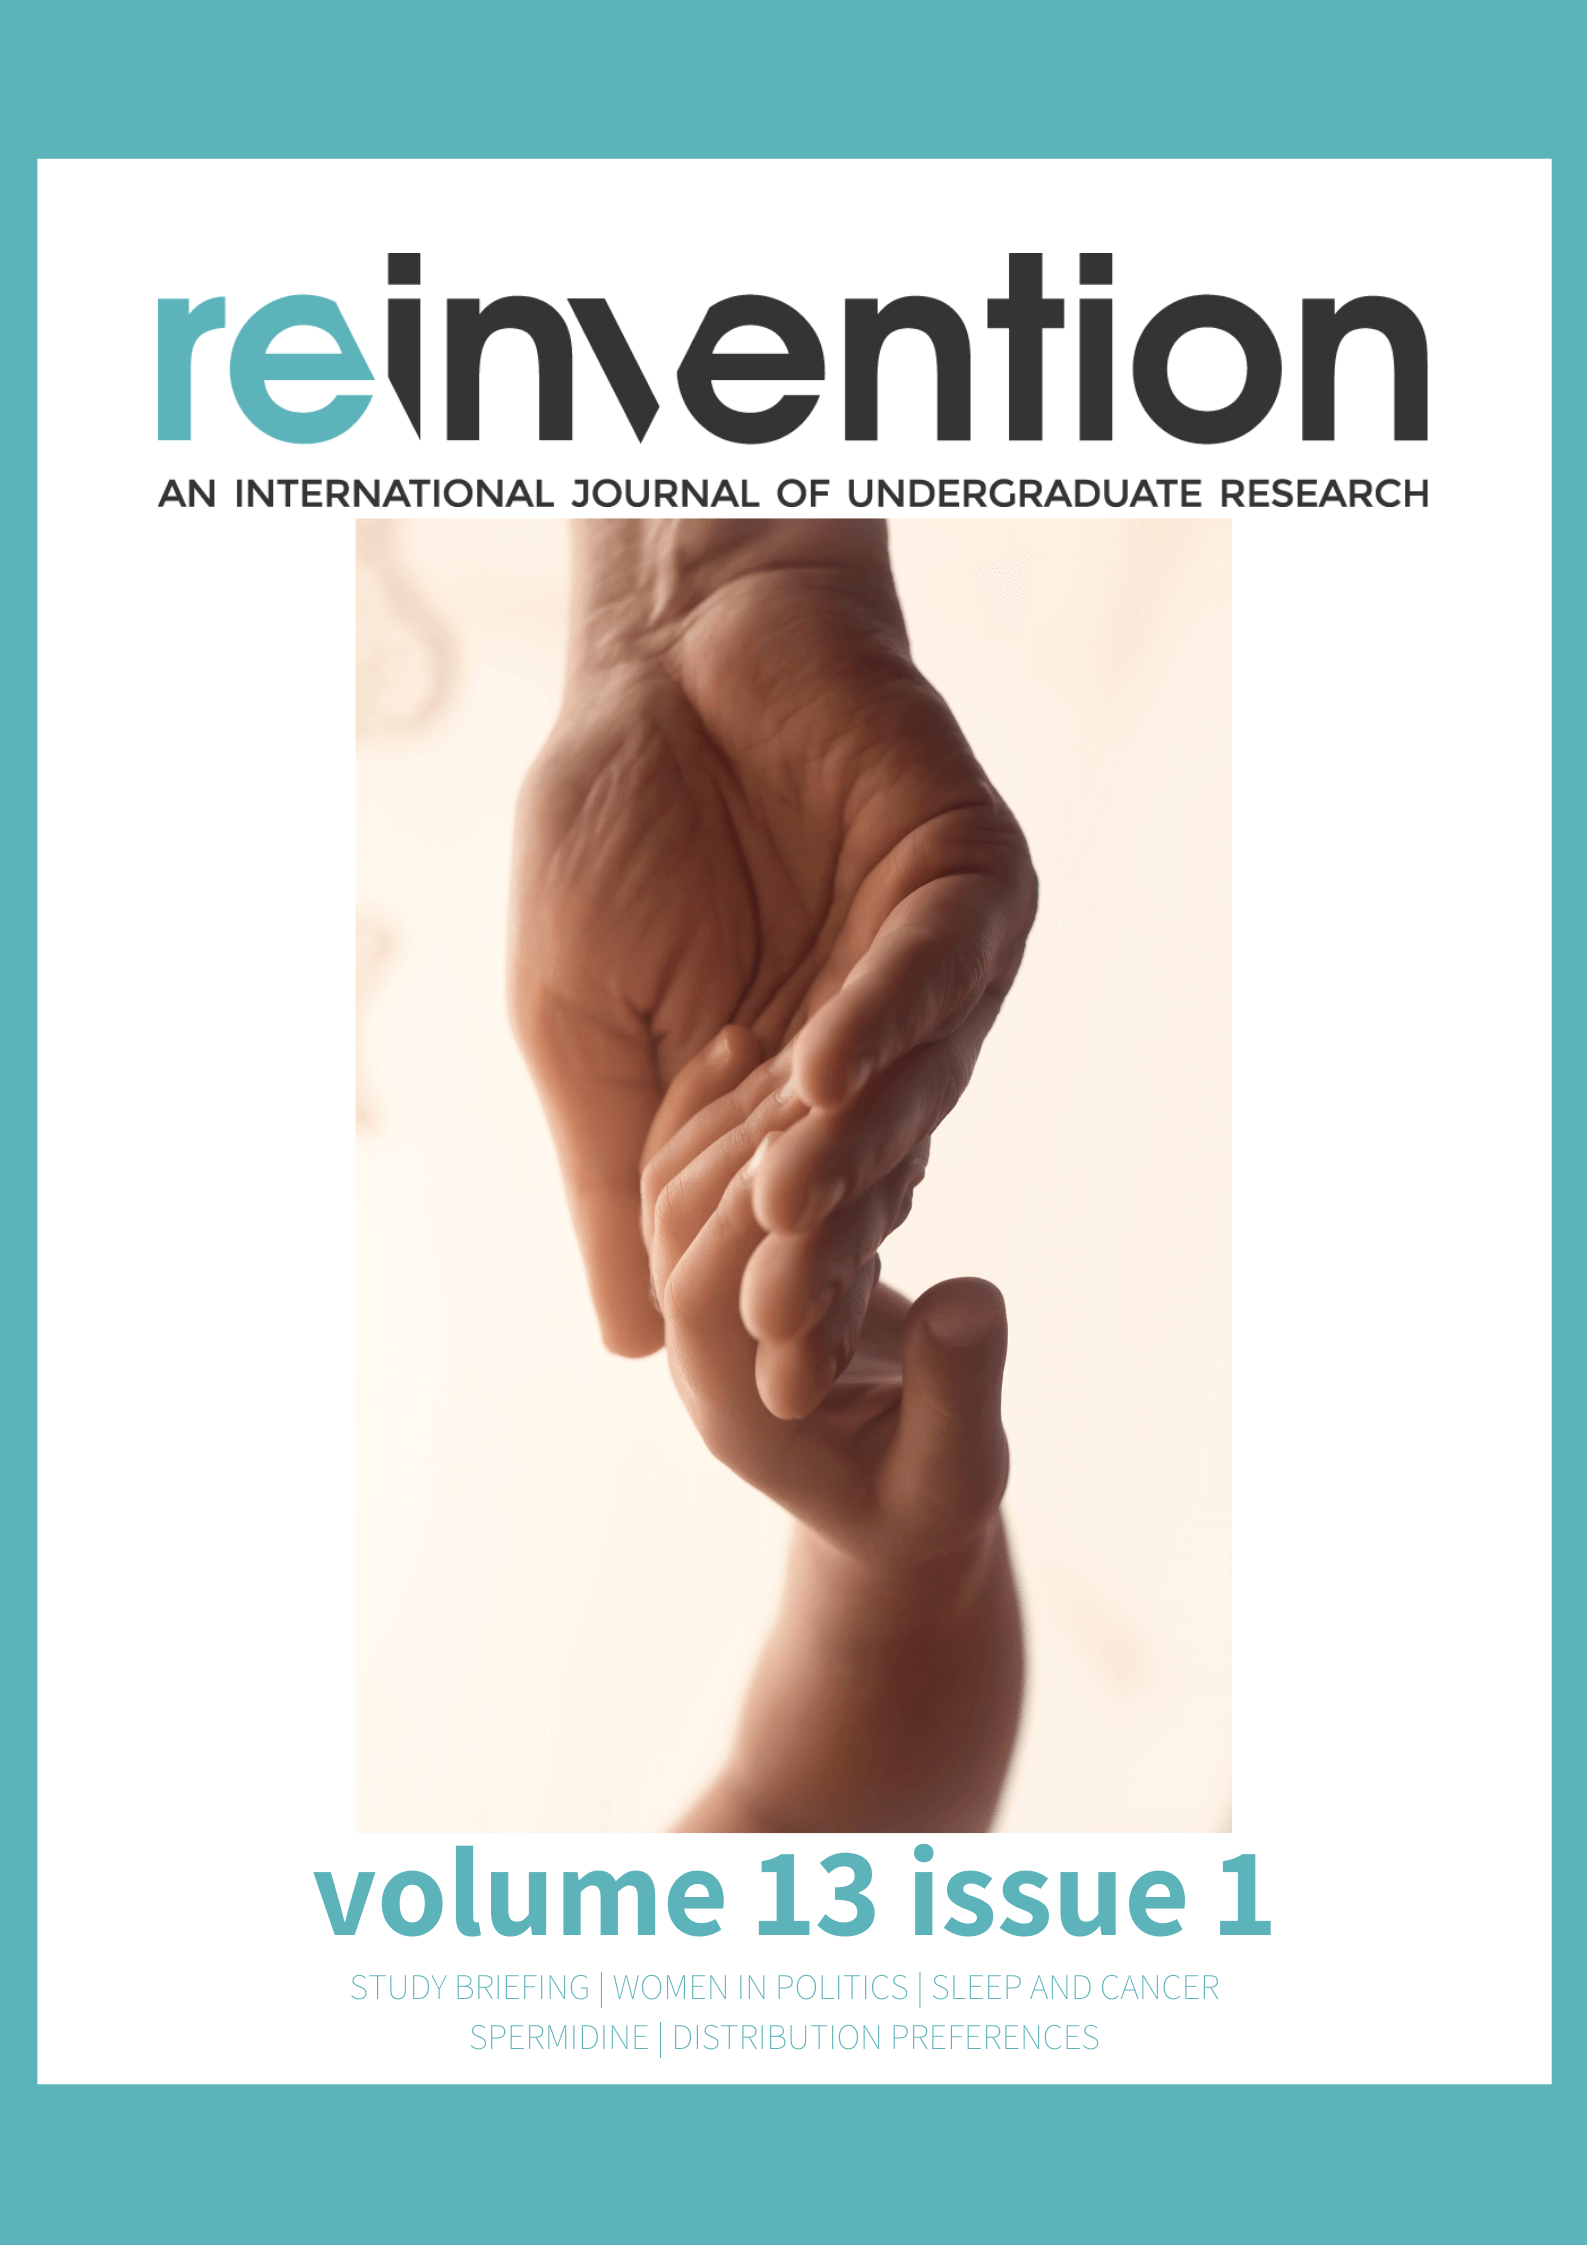 Reinvention journal volume 13 issue 1 cover